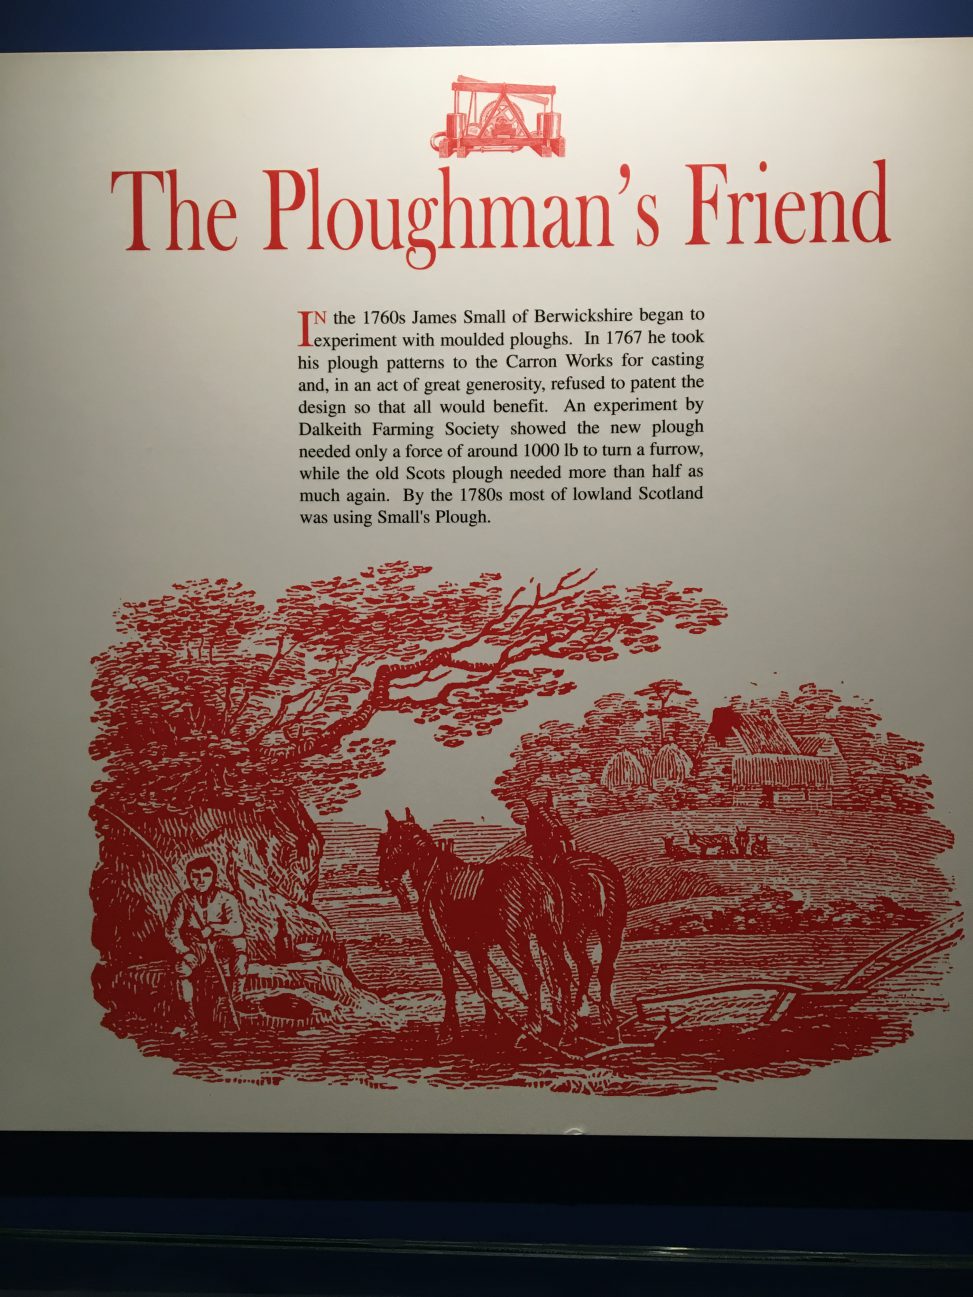 The Ploughman's Friend - explanation sign from a musuem